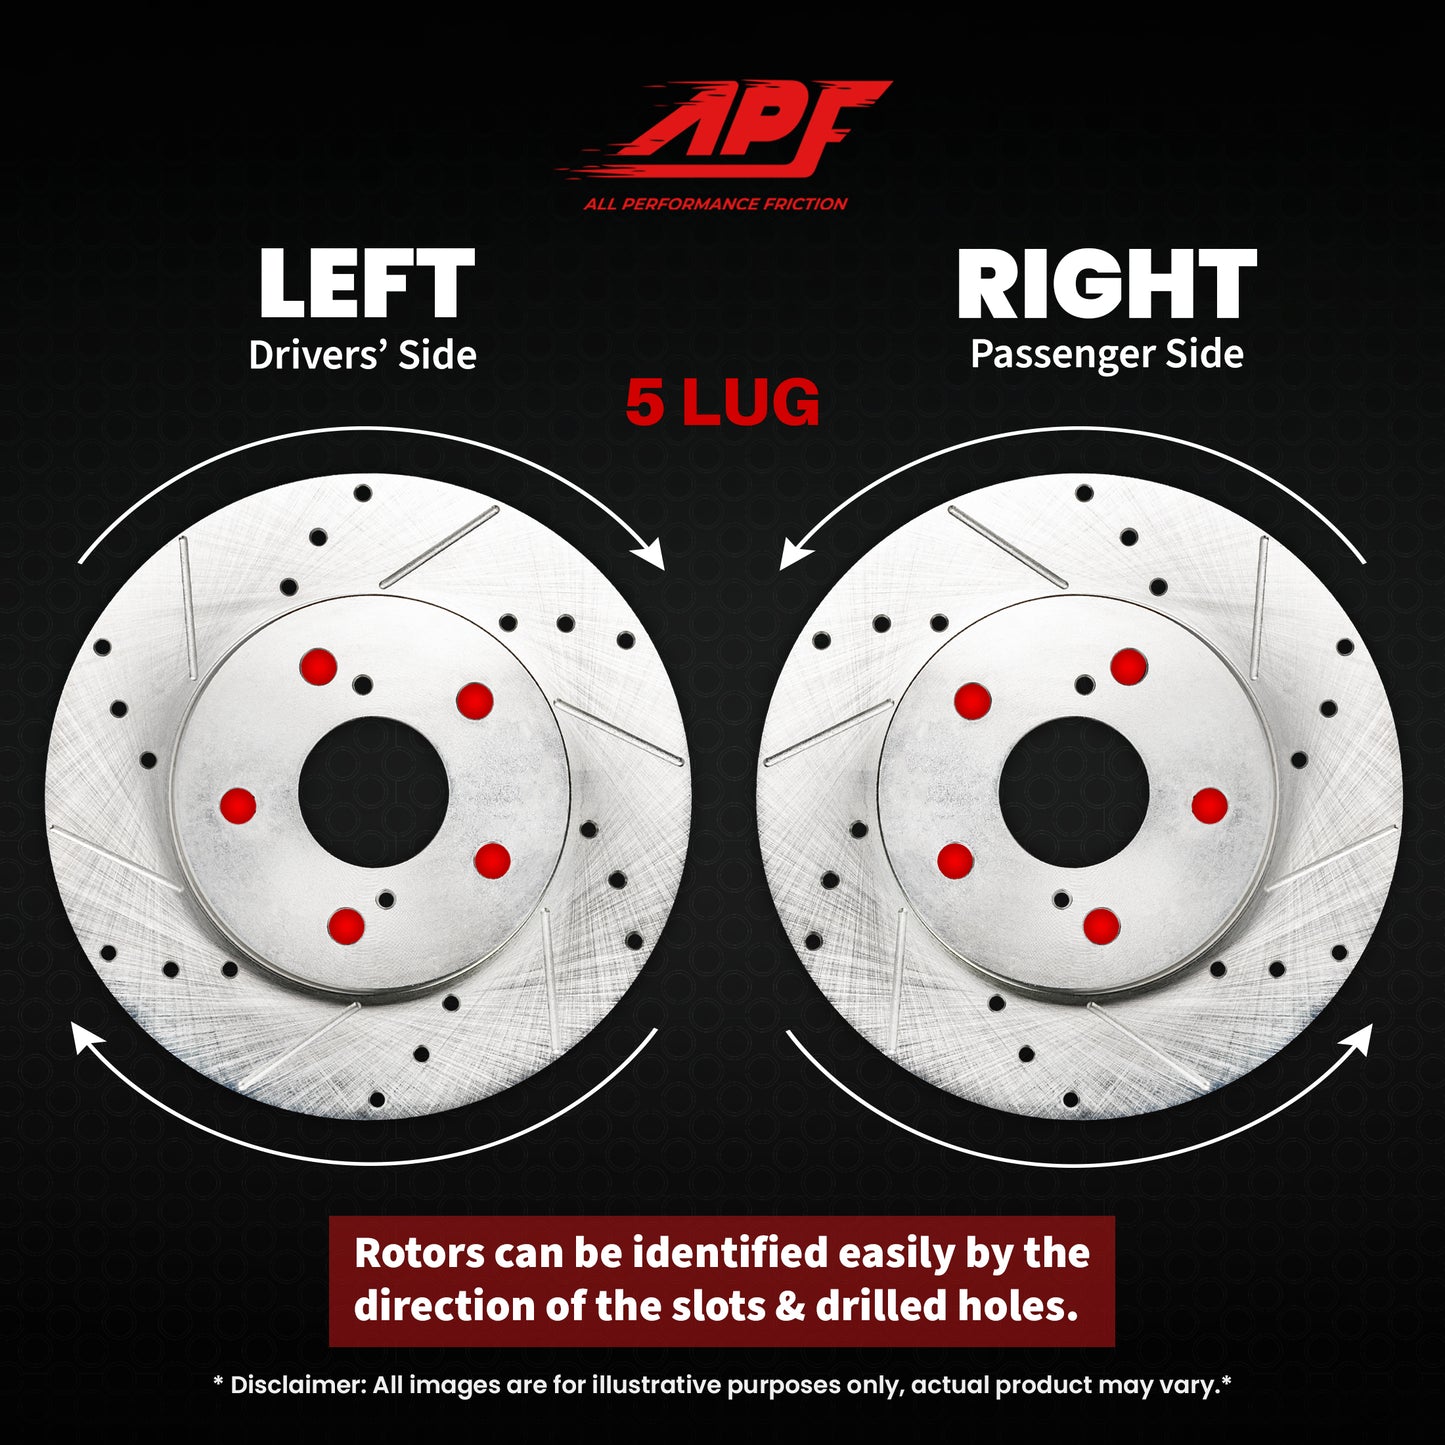 APF All Performance Friction Front Rotors compatible with Acura TL 2009-2014 Zinc Drilled Slotted Rotors | $168.53